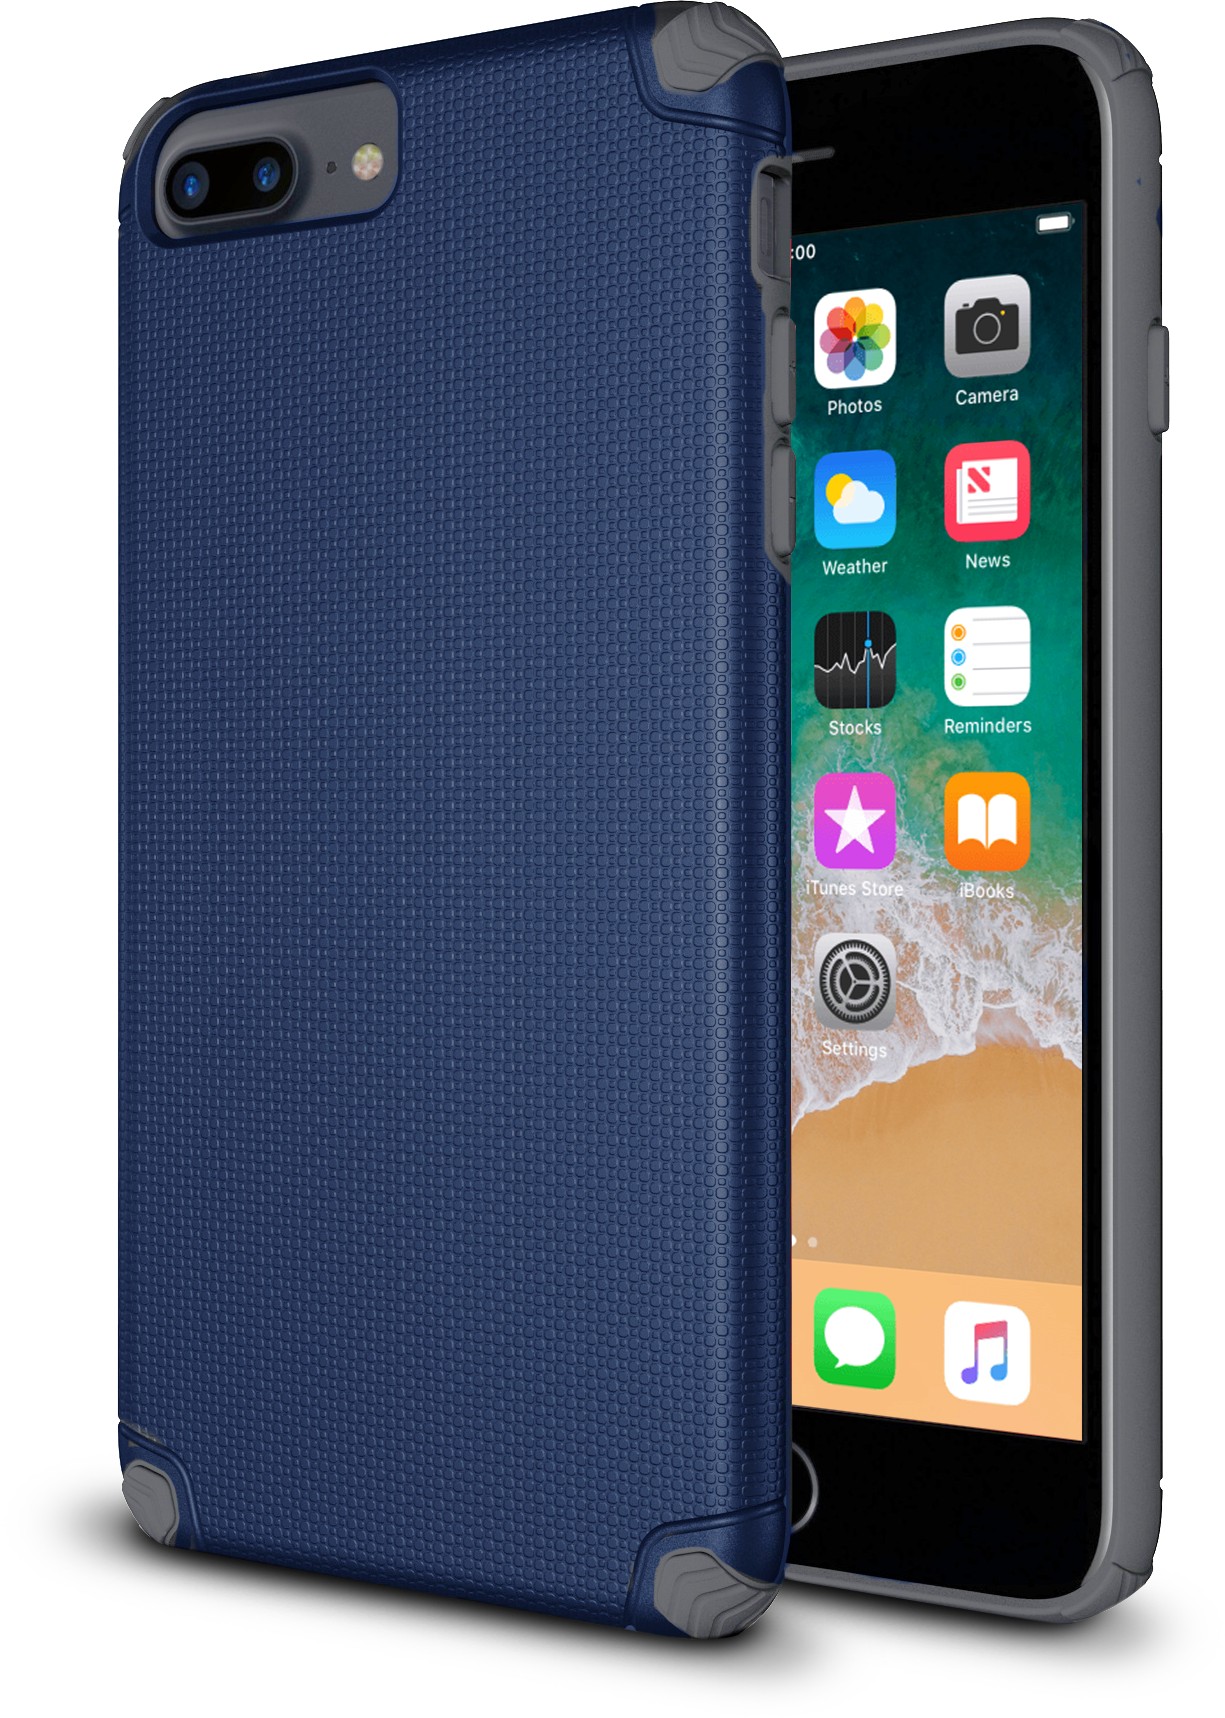 Base ProTech - Rugged Armor Protective Case for iPhone 6, 7, 8 Plus - Blue